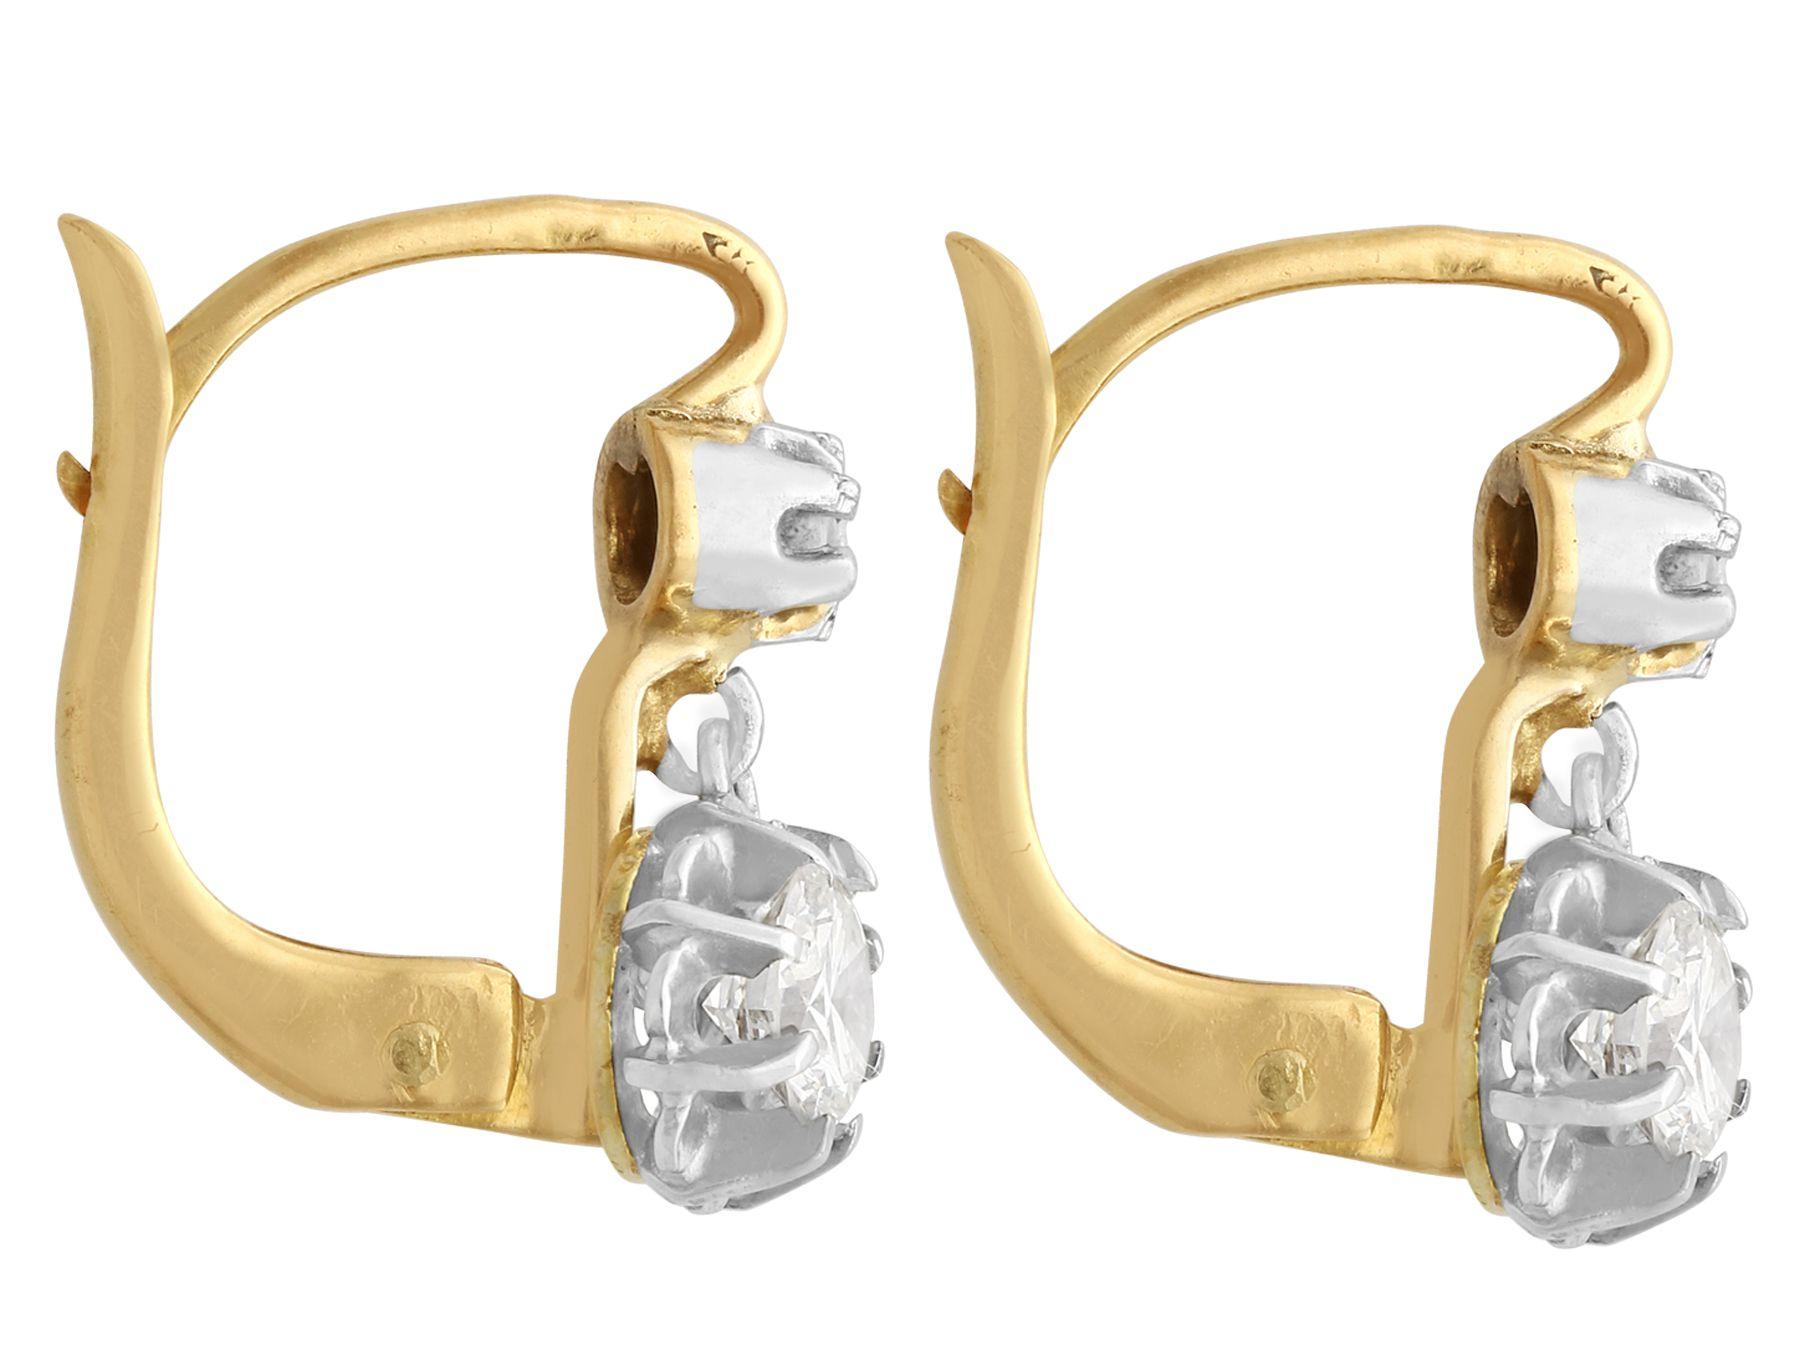 A fine and impressive pair of vintage French 0.54 carat diamond and 18 karat yellow gold earrings; part of our vintage jewelry and estate jewelry collections

These fine and impressive vintage 1940s earrings have been crafted in 18k yellow